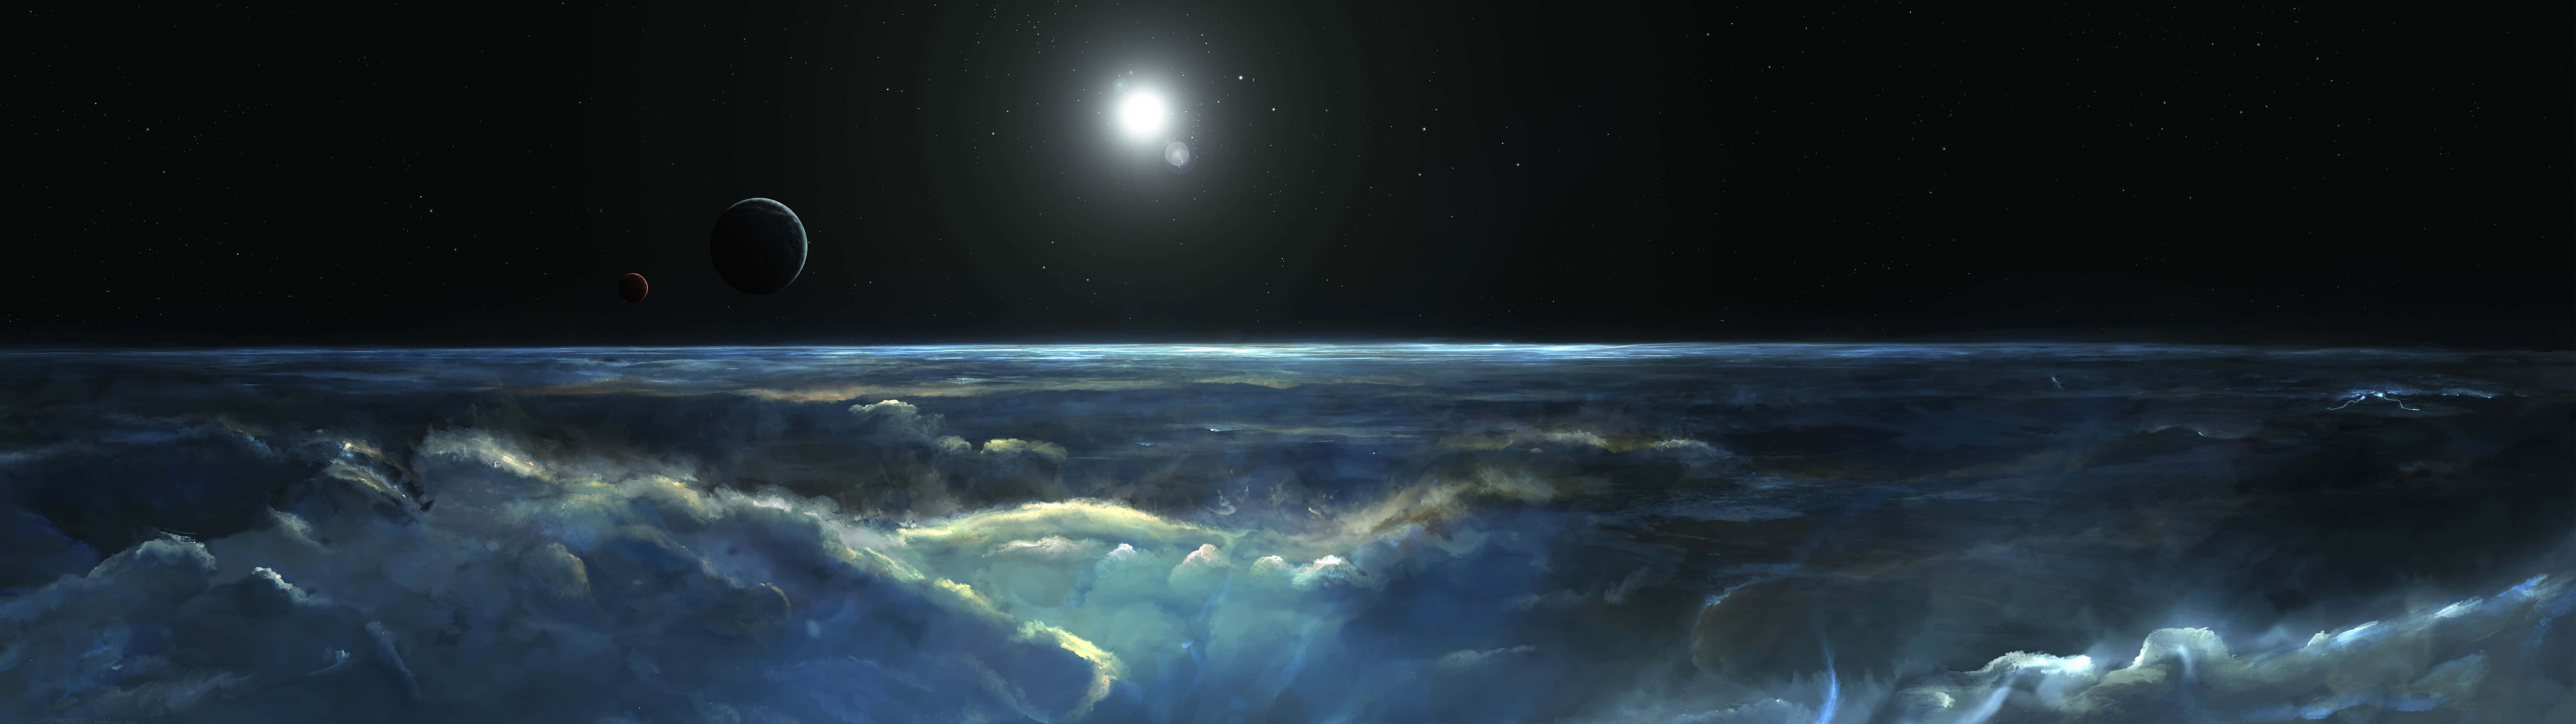 An Artist's Rendering Of A Planet In Space Wallpaper